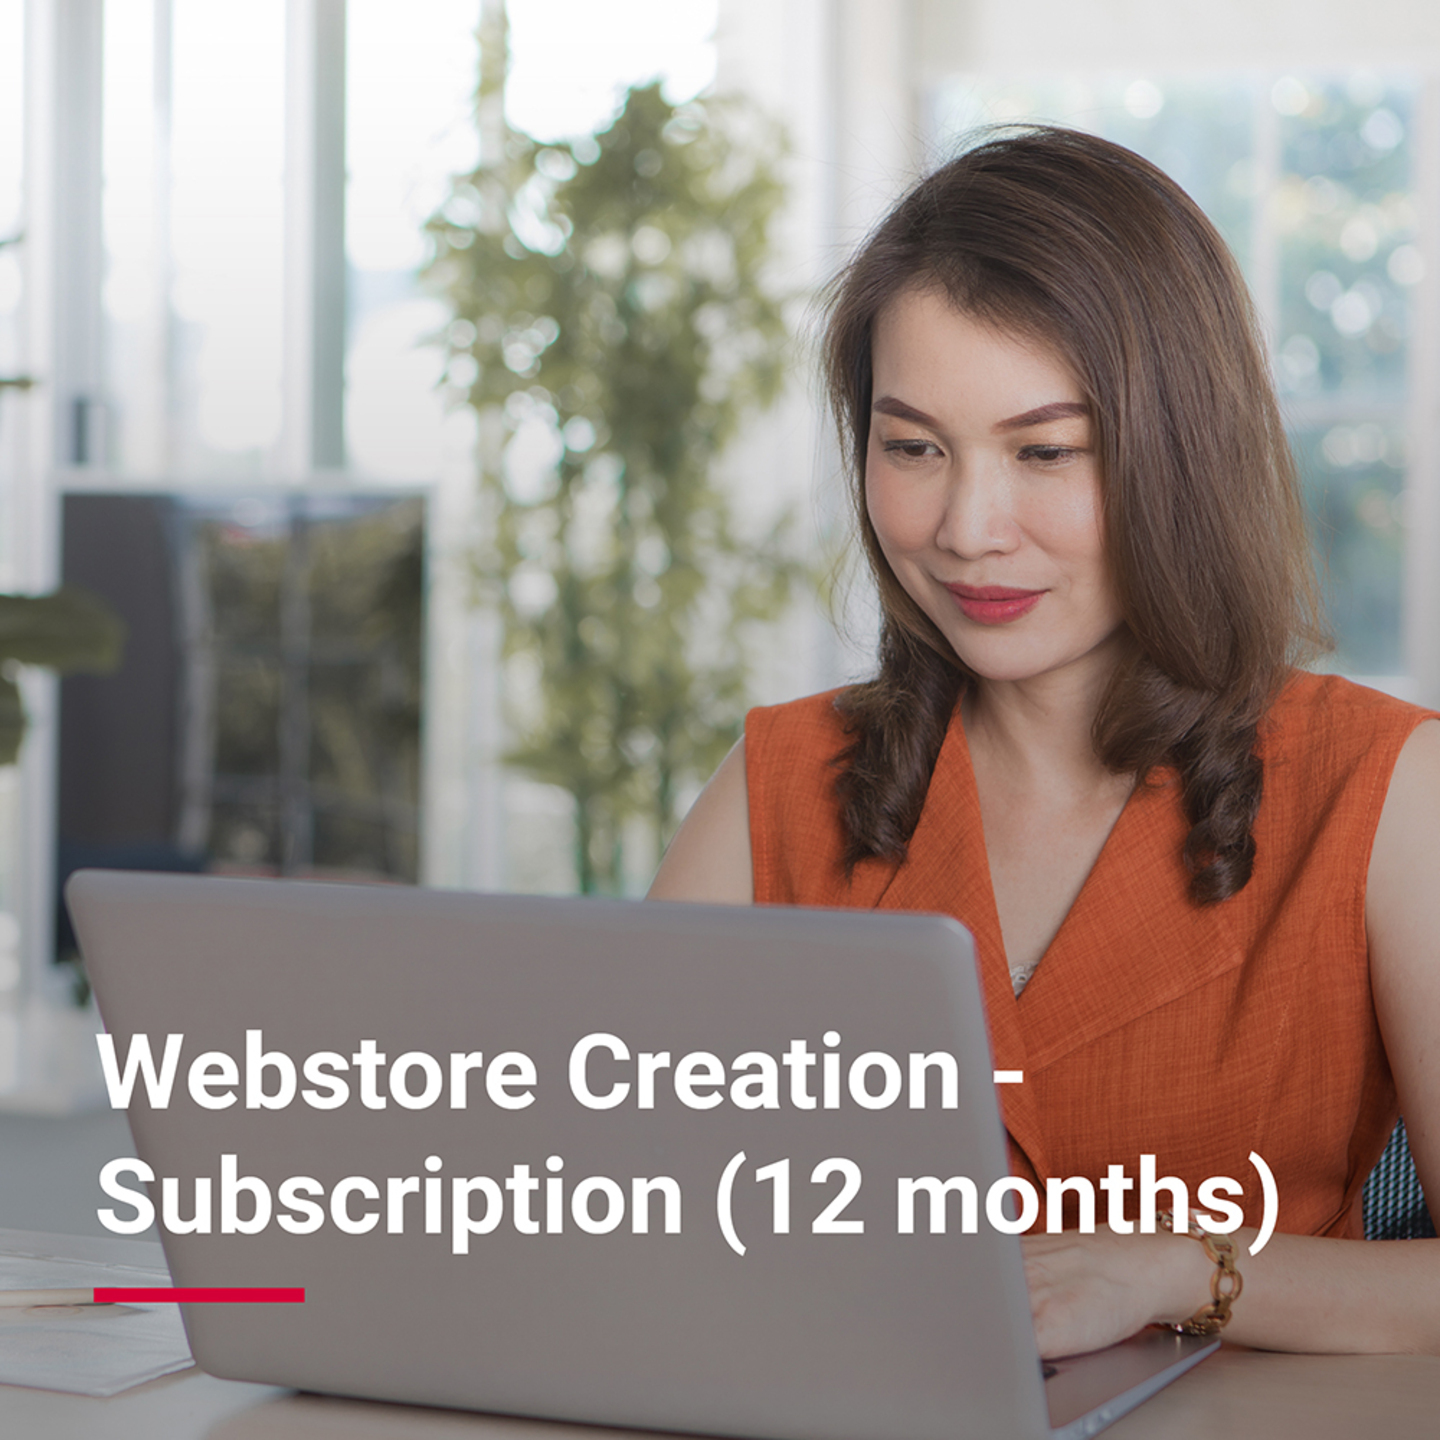 Webstore Creation - Subscription  12 months